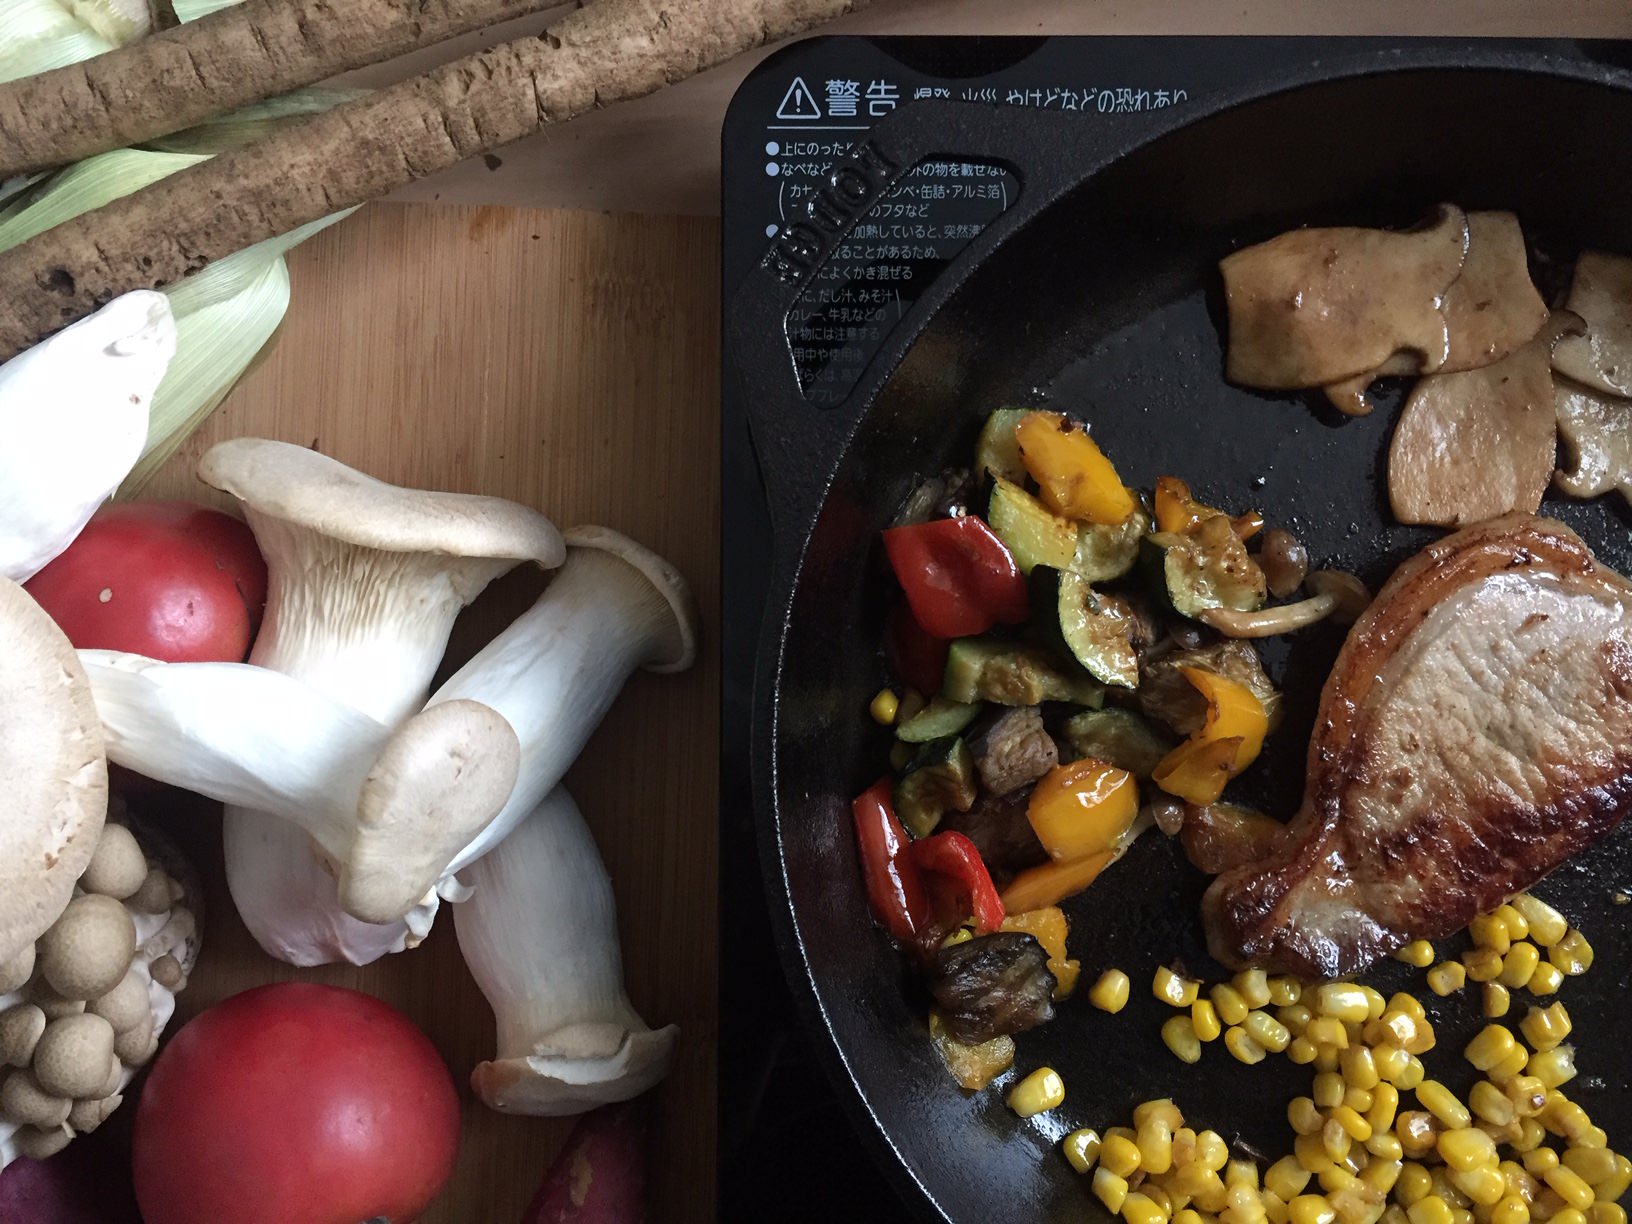 Why cook with cast iron? Here's 9 great reasons.